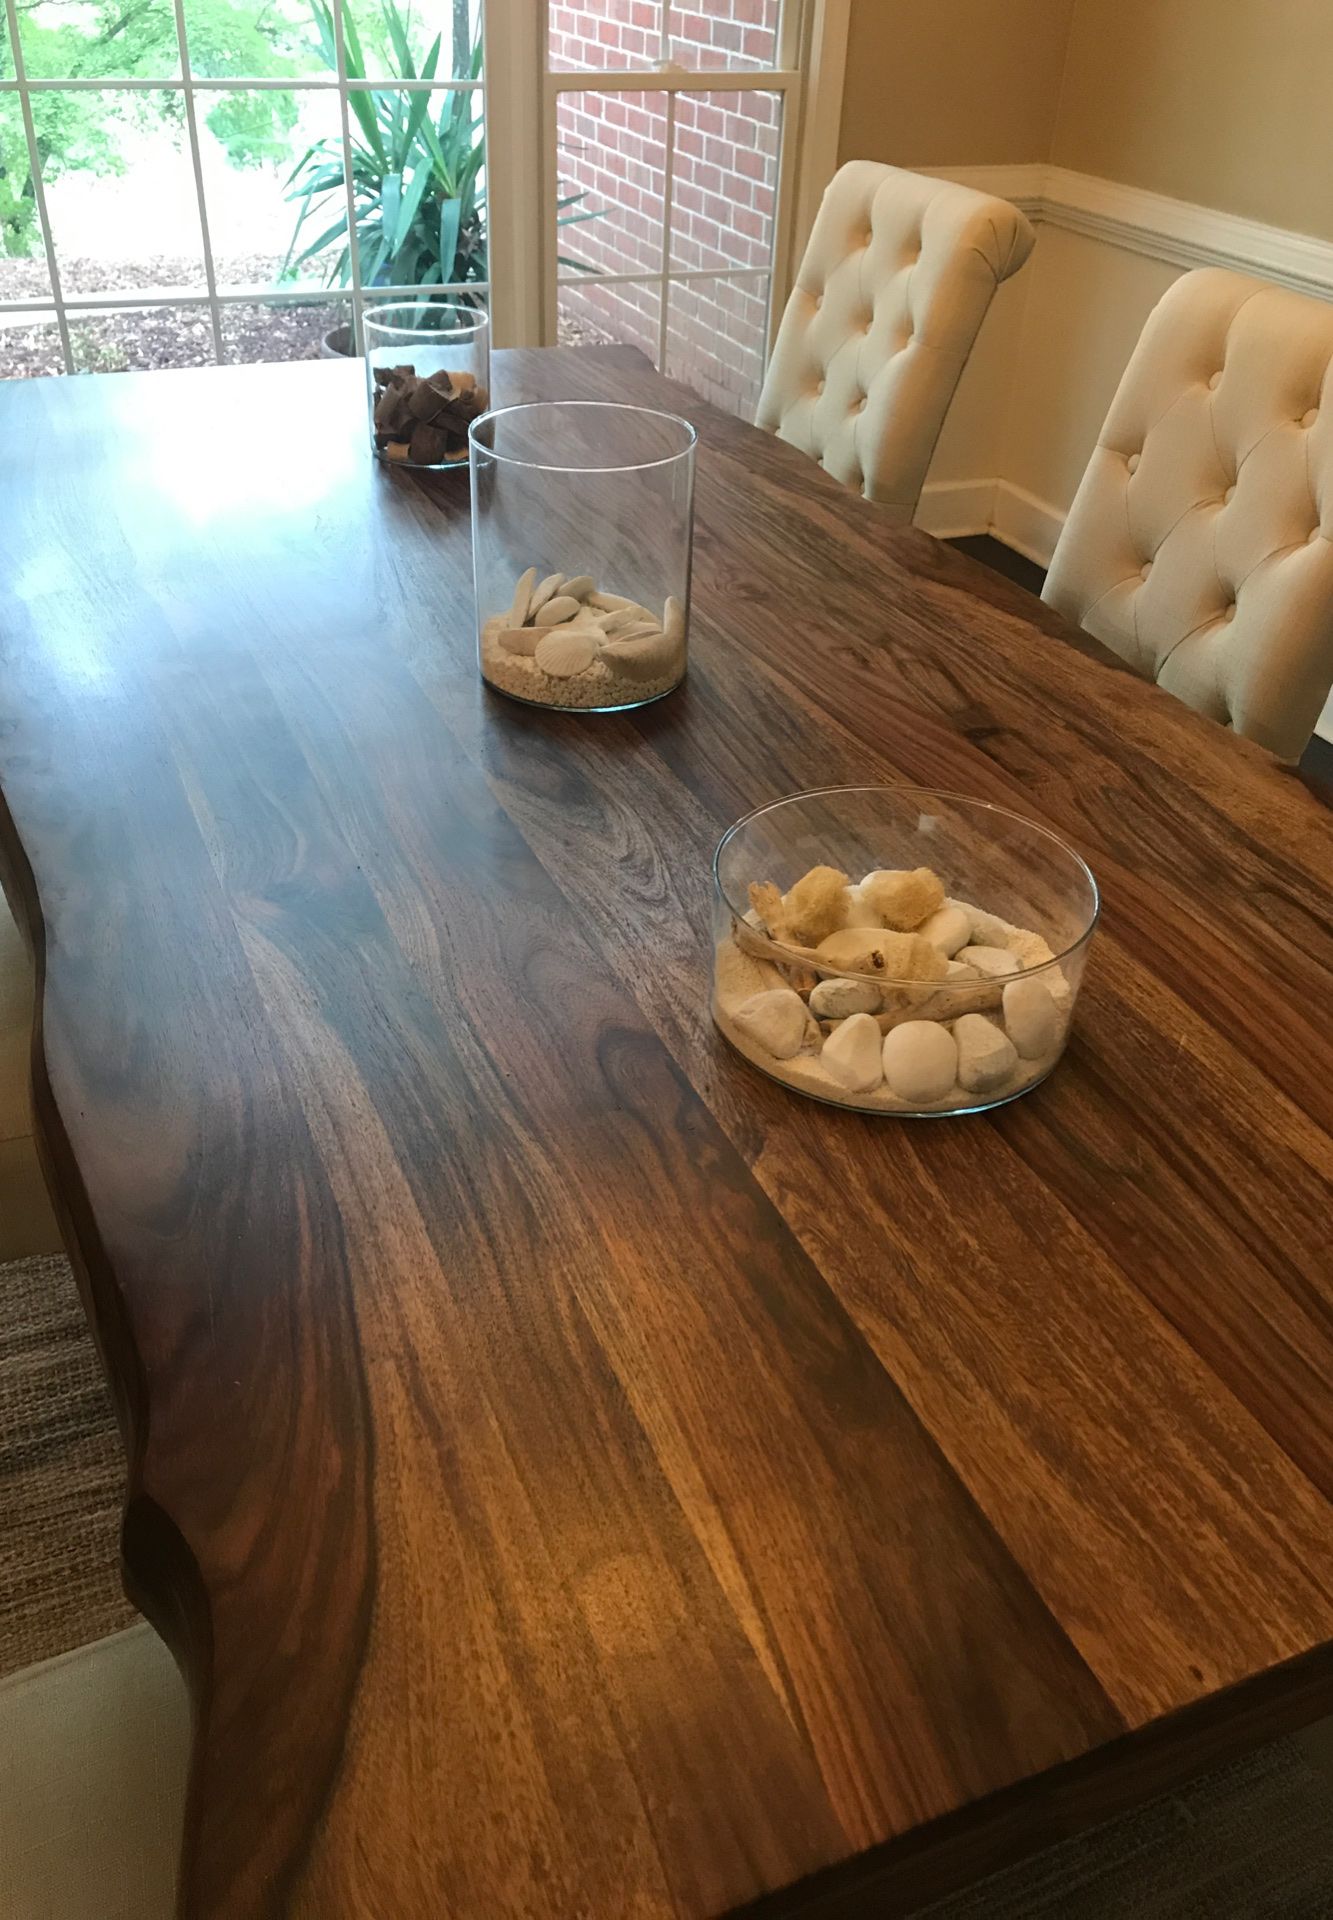 Modern dining table with chairs